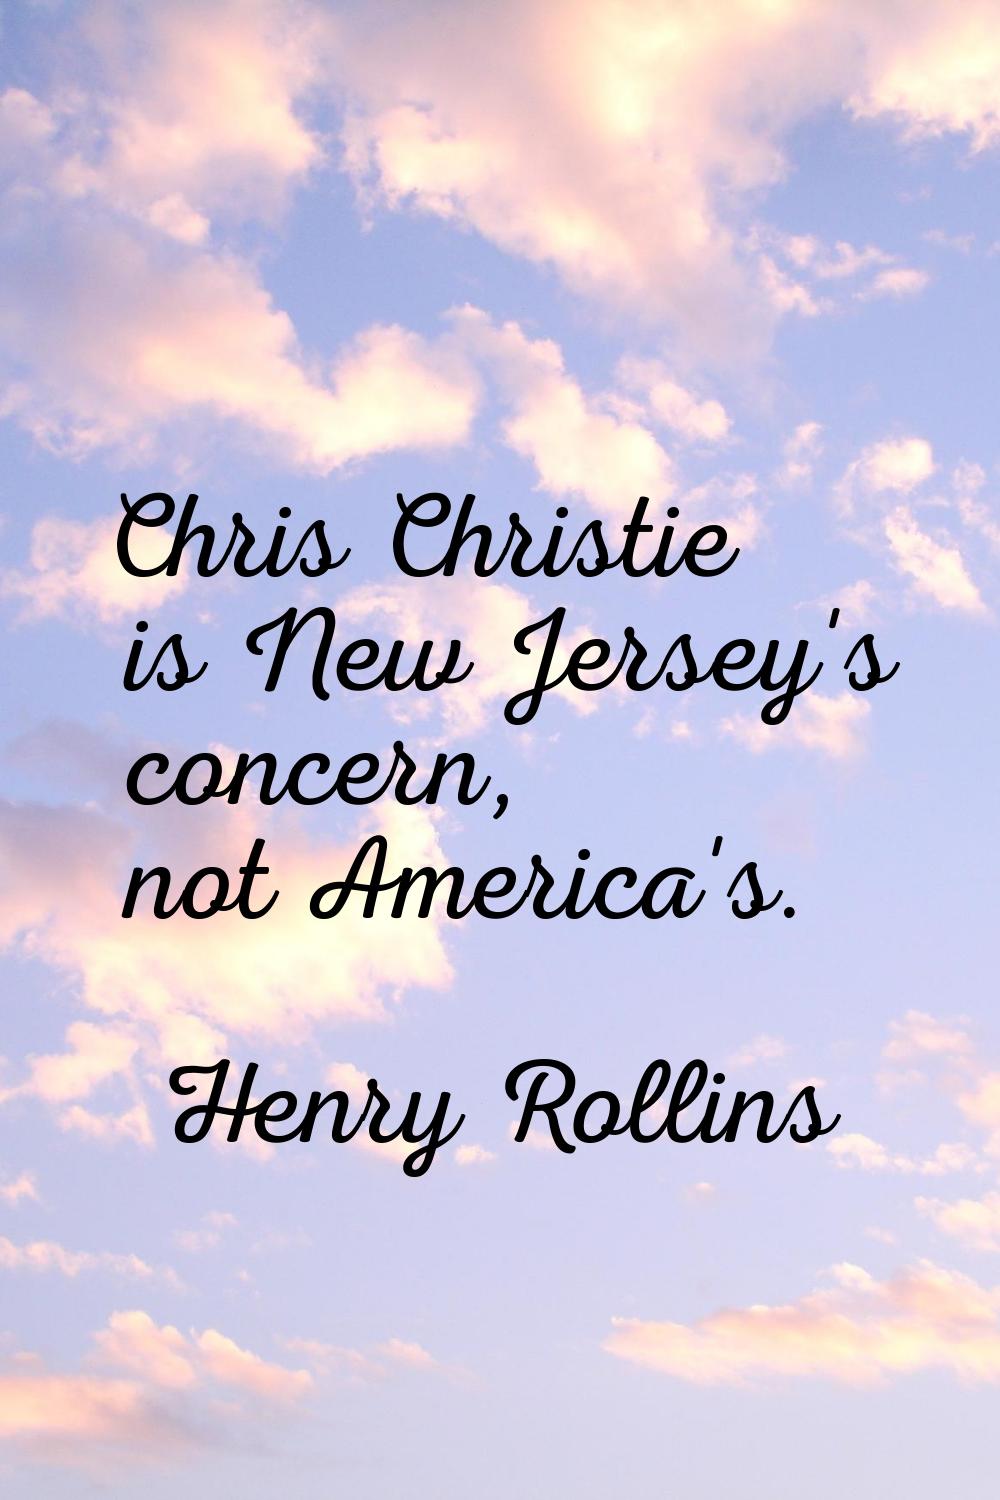 Chris Christie is New Jersey's concern, not America's.